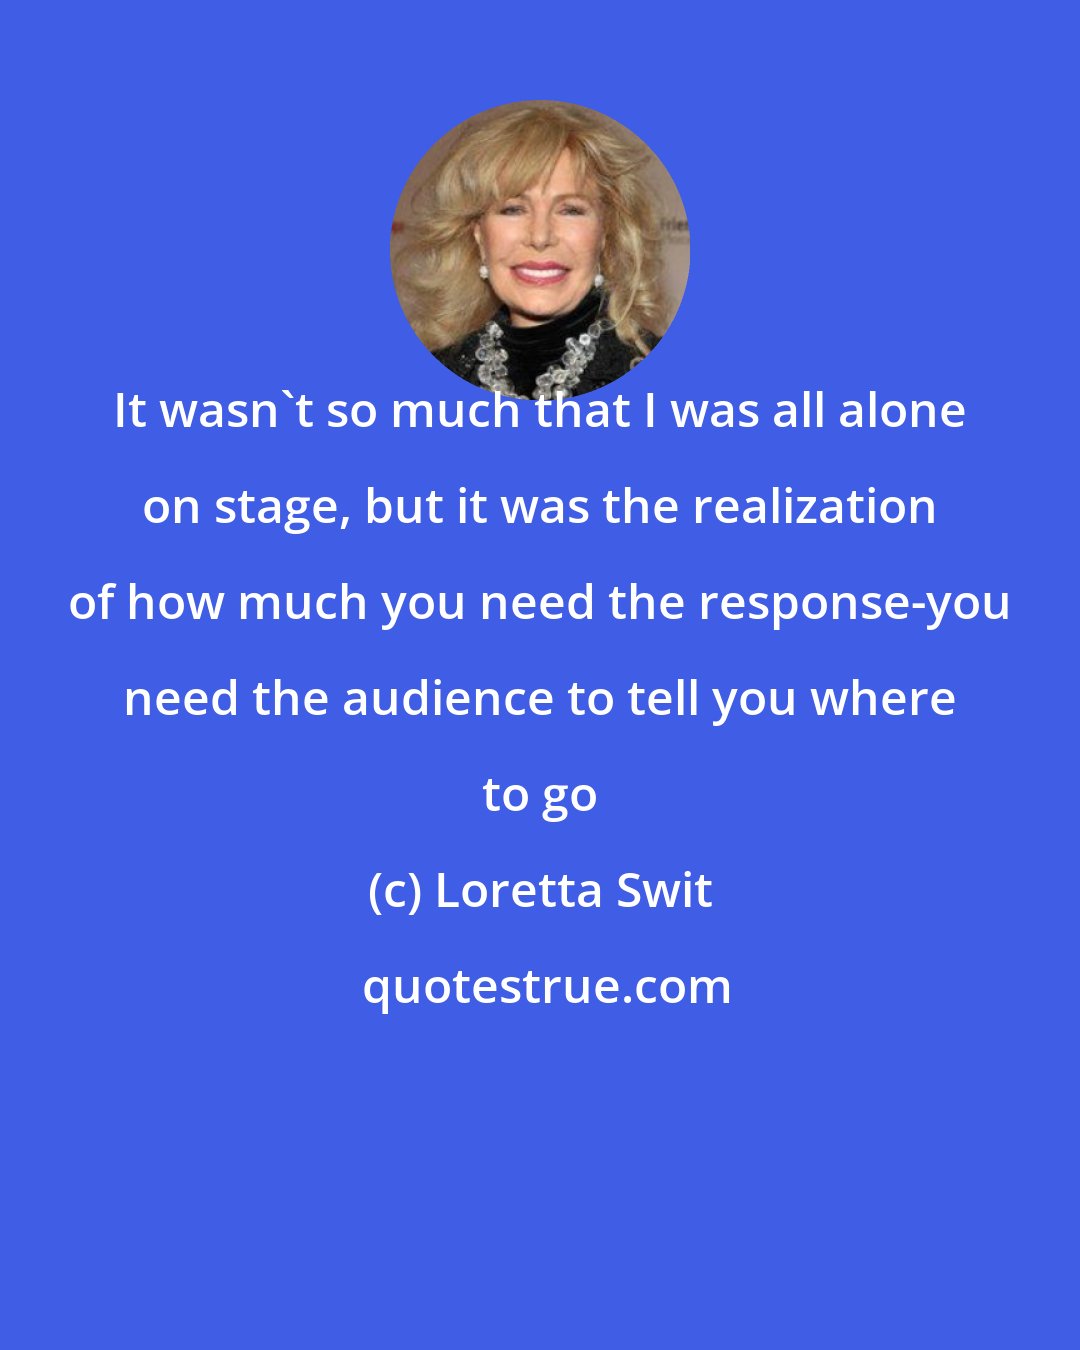 Loretta Swit: It wasn't so much that I was all alone on stage, but it was the realization of how much you need the response-you need the audience to tell you where to go